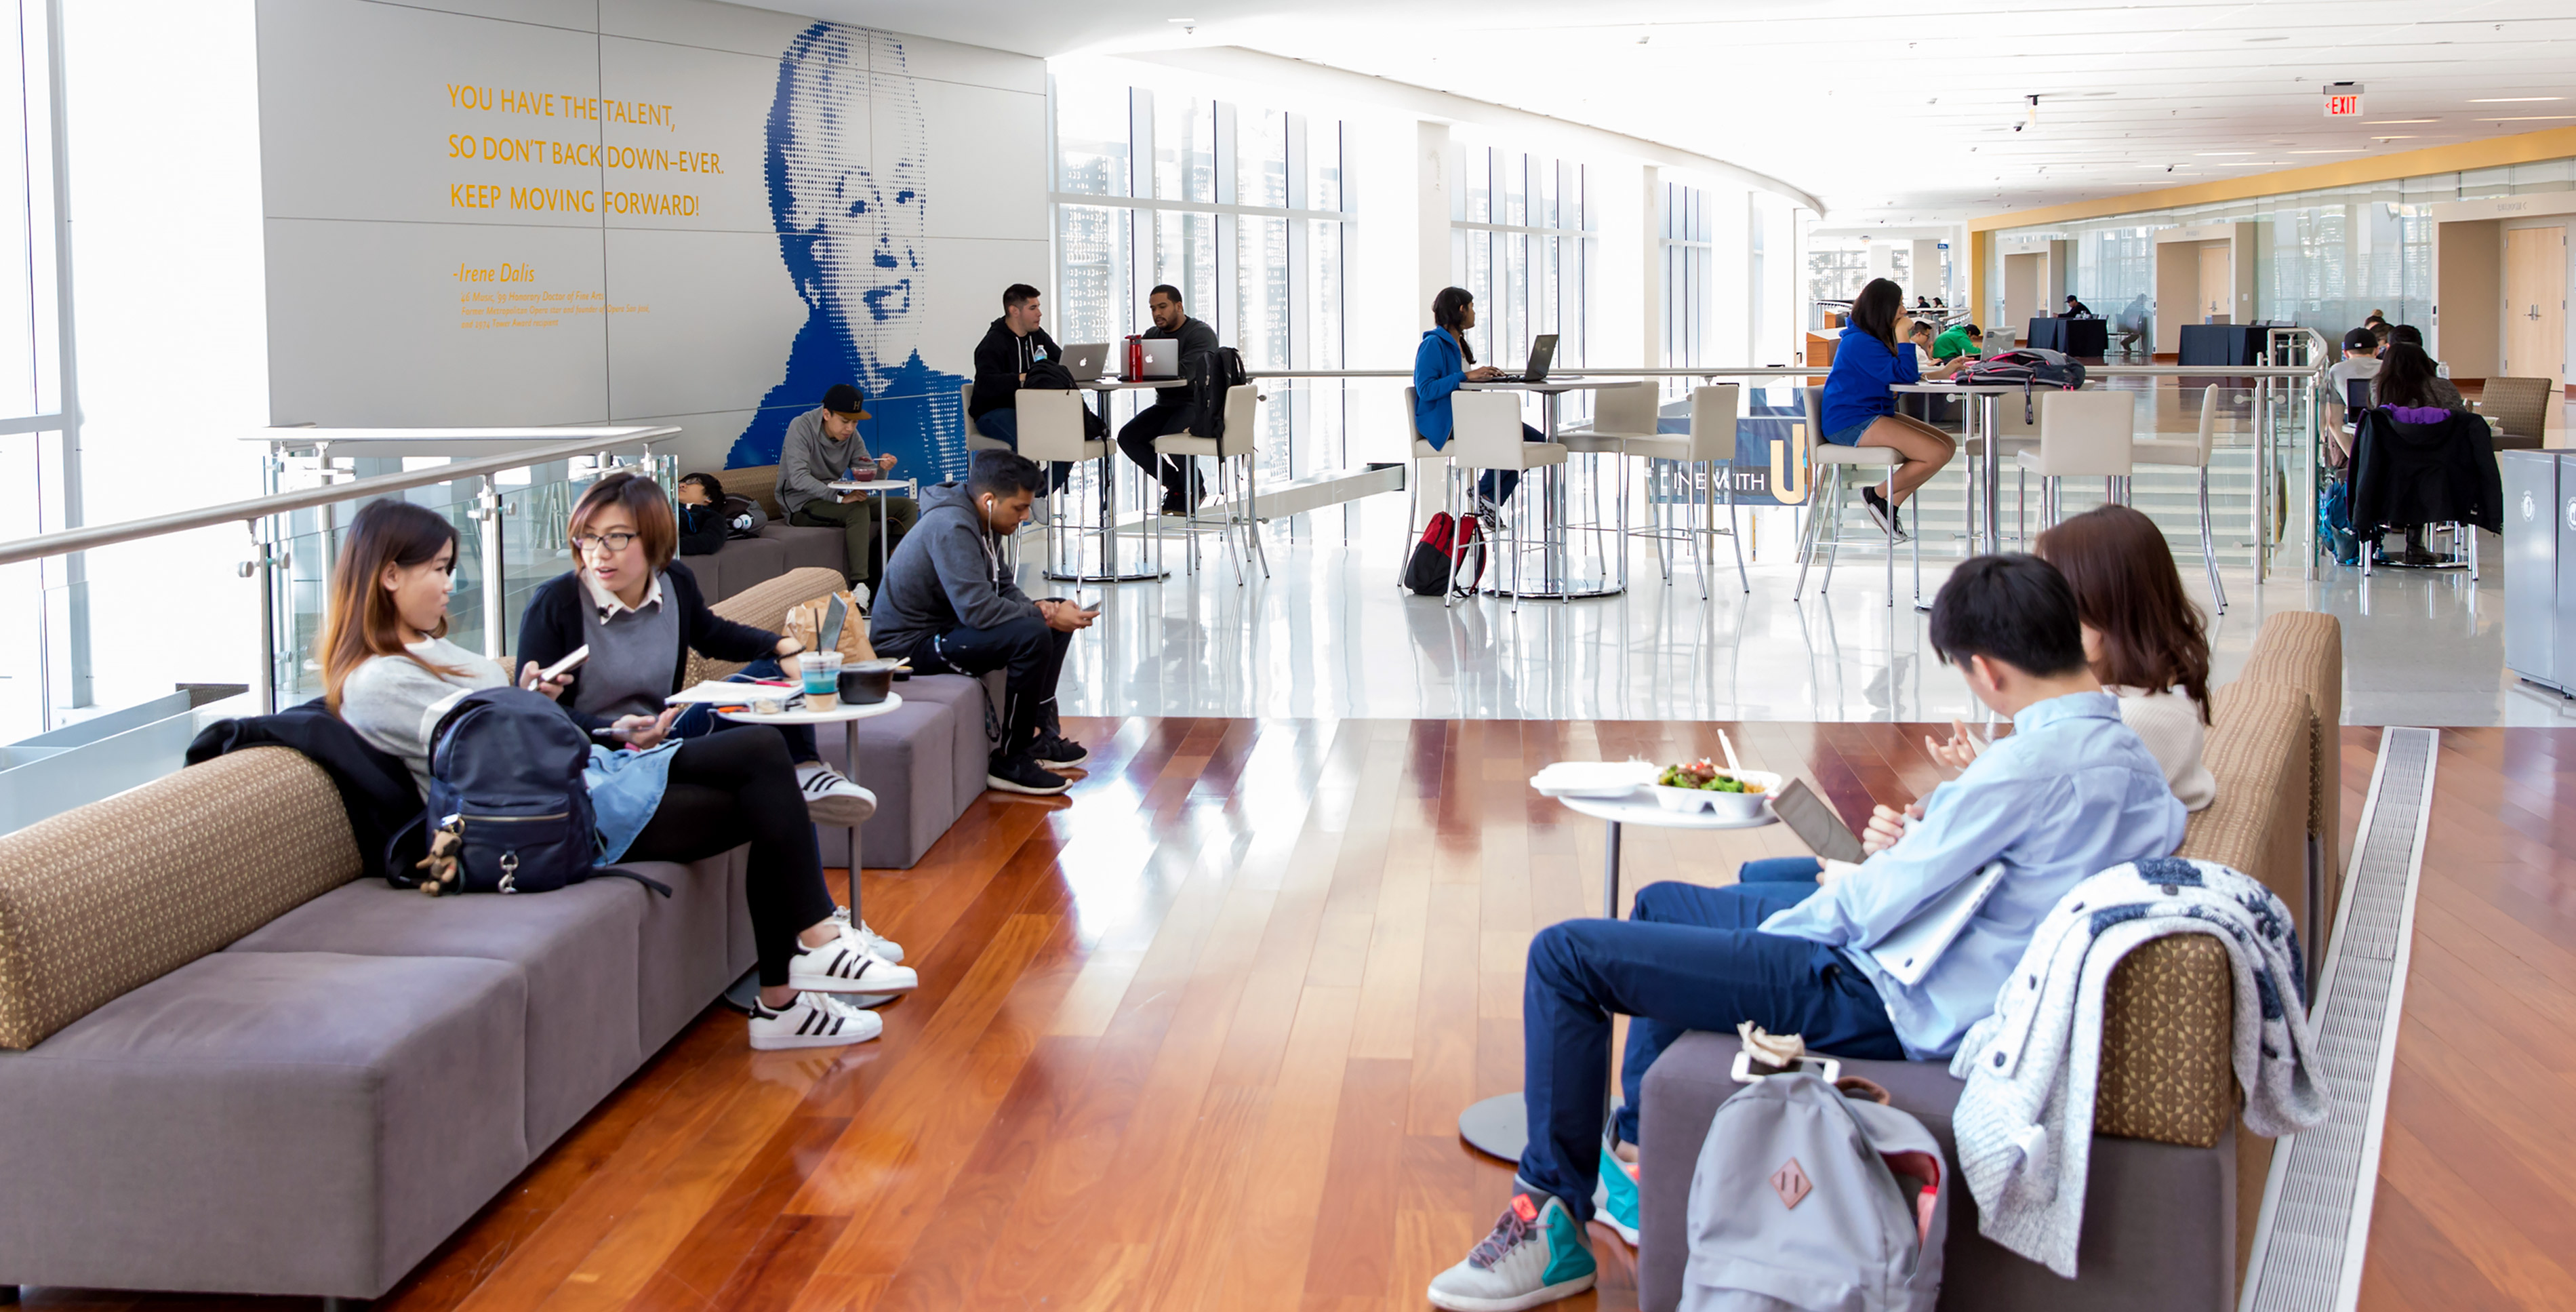 Students, faculty and staff enjoying the lounge area in the student union.